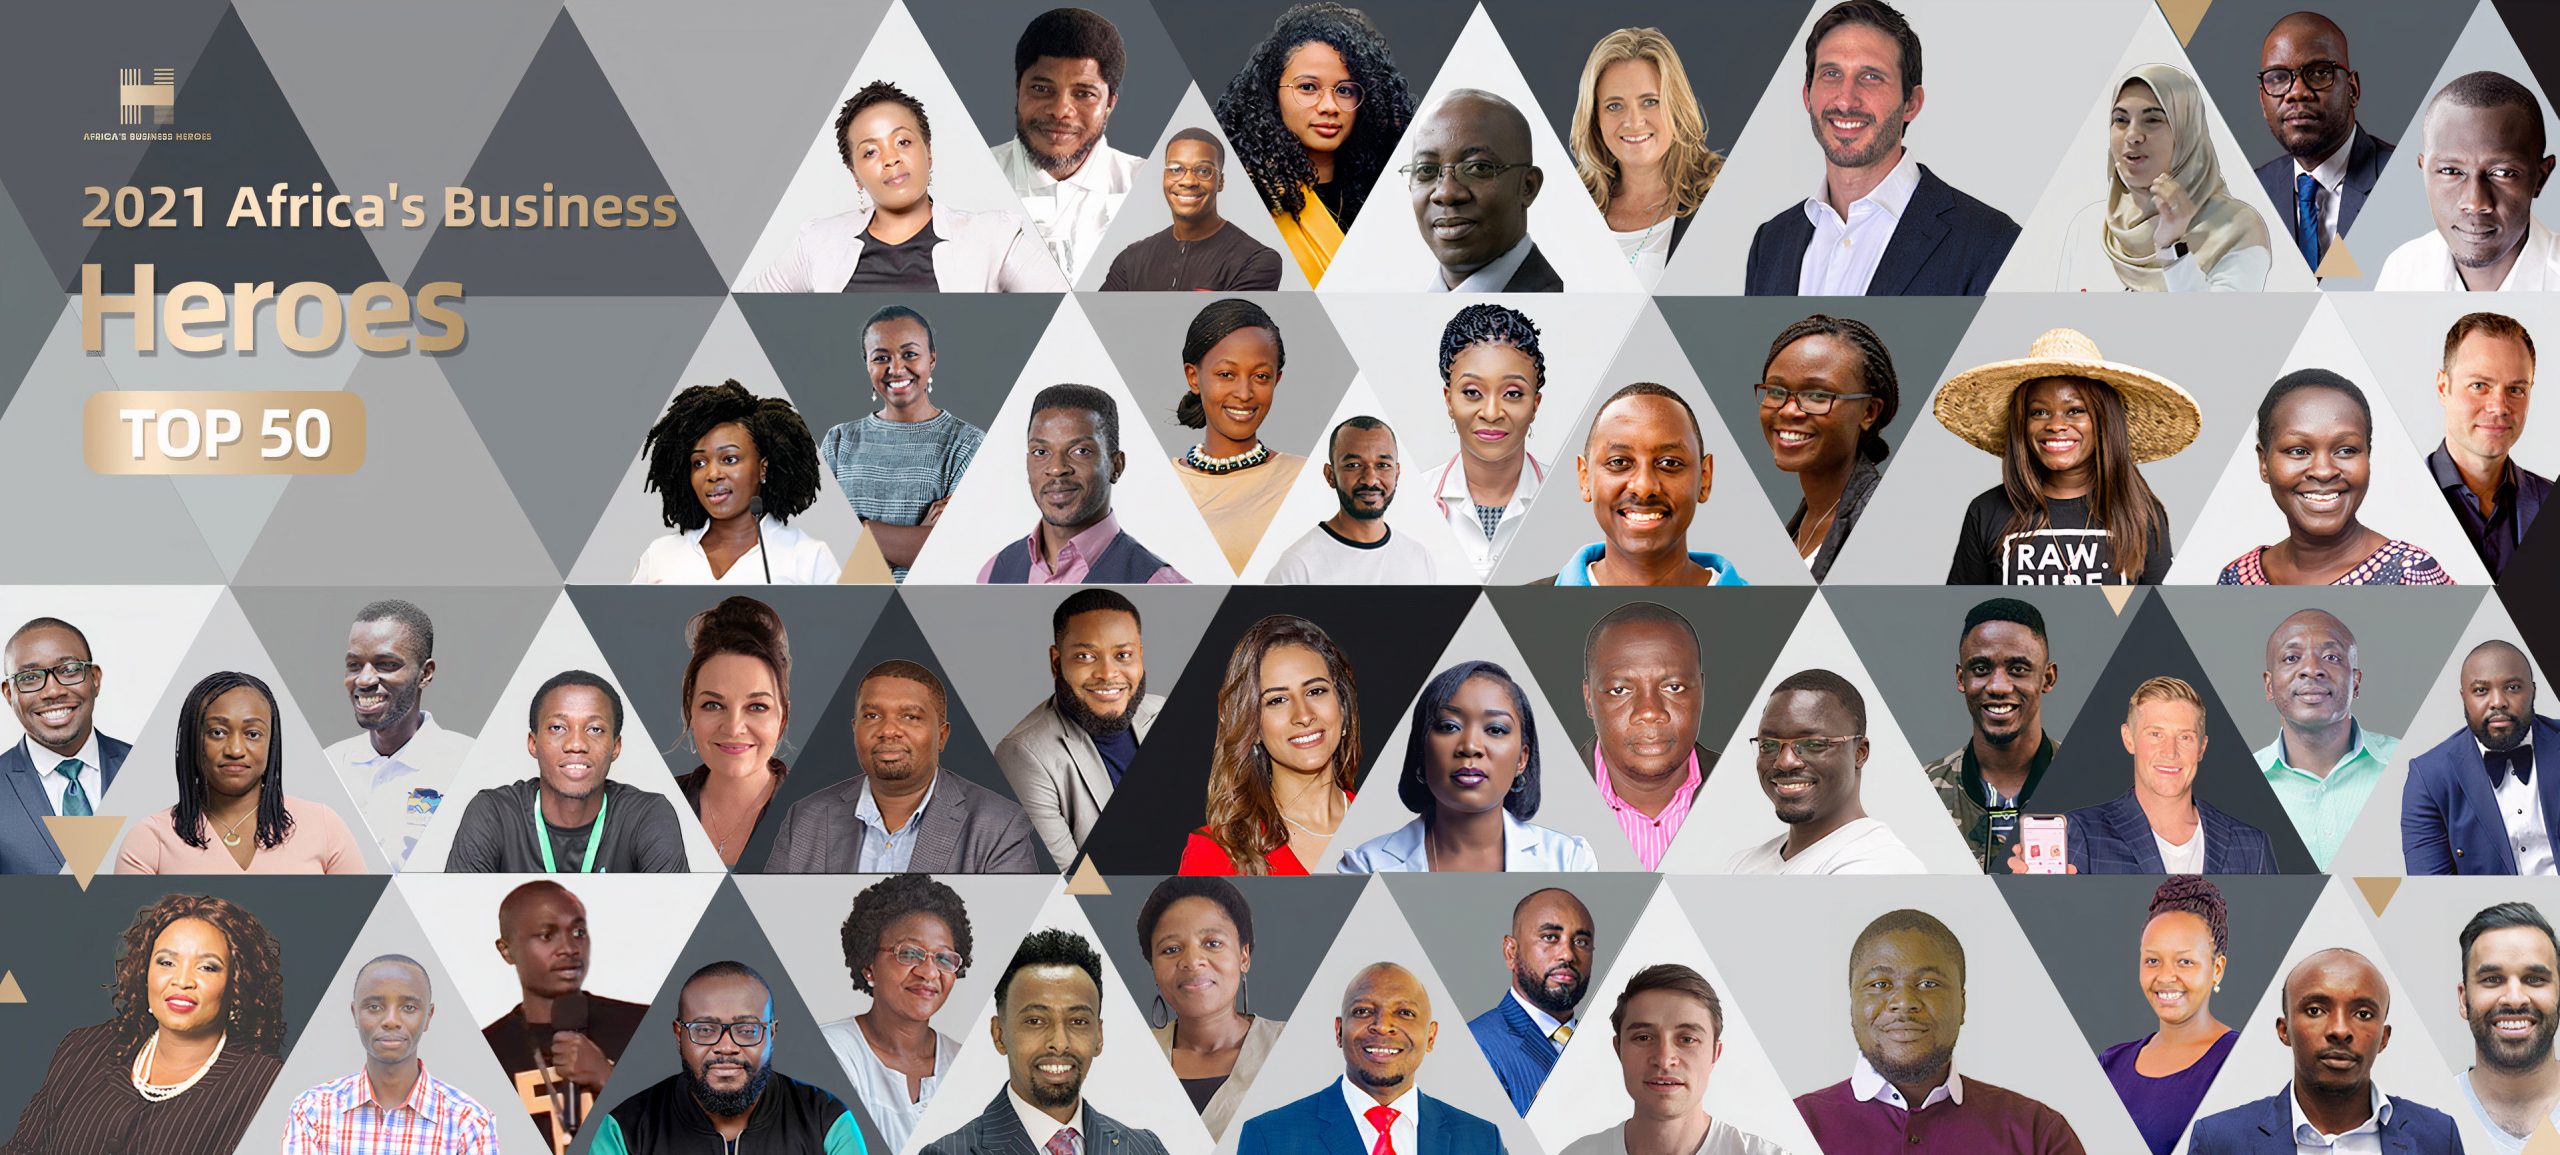 Africa's Business Heroes 2021 Prize Competition ,Top 50